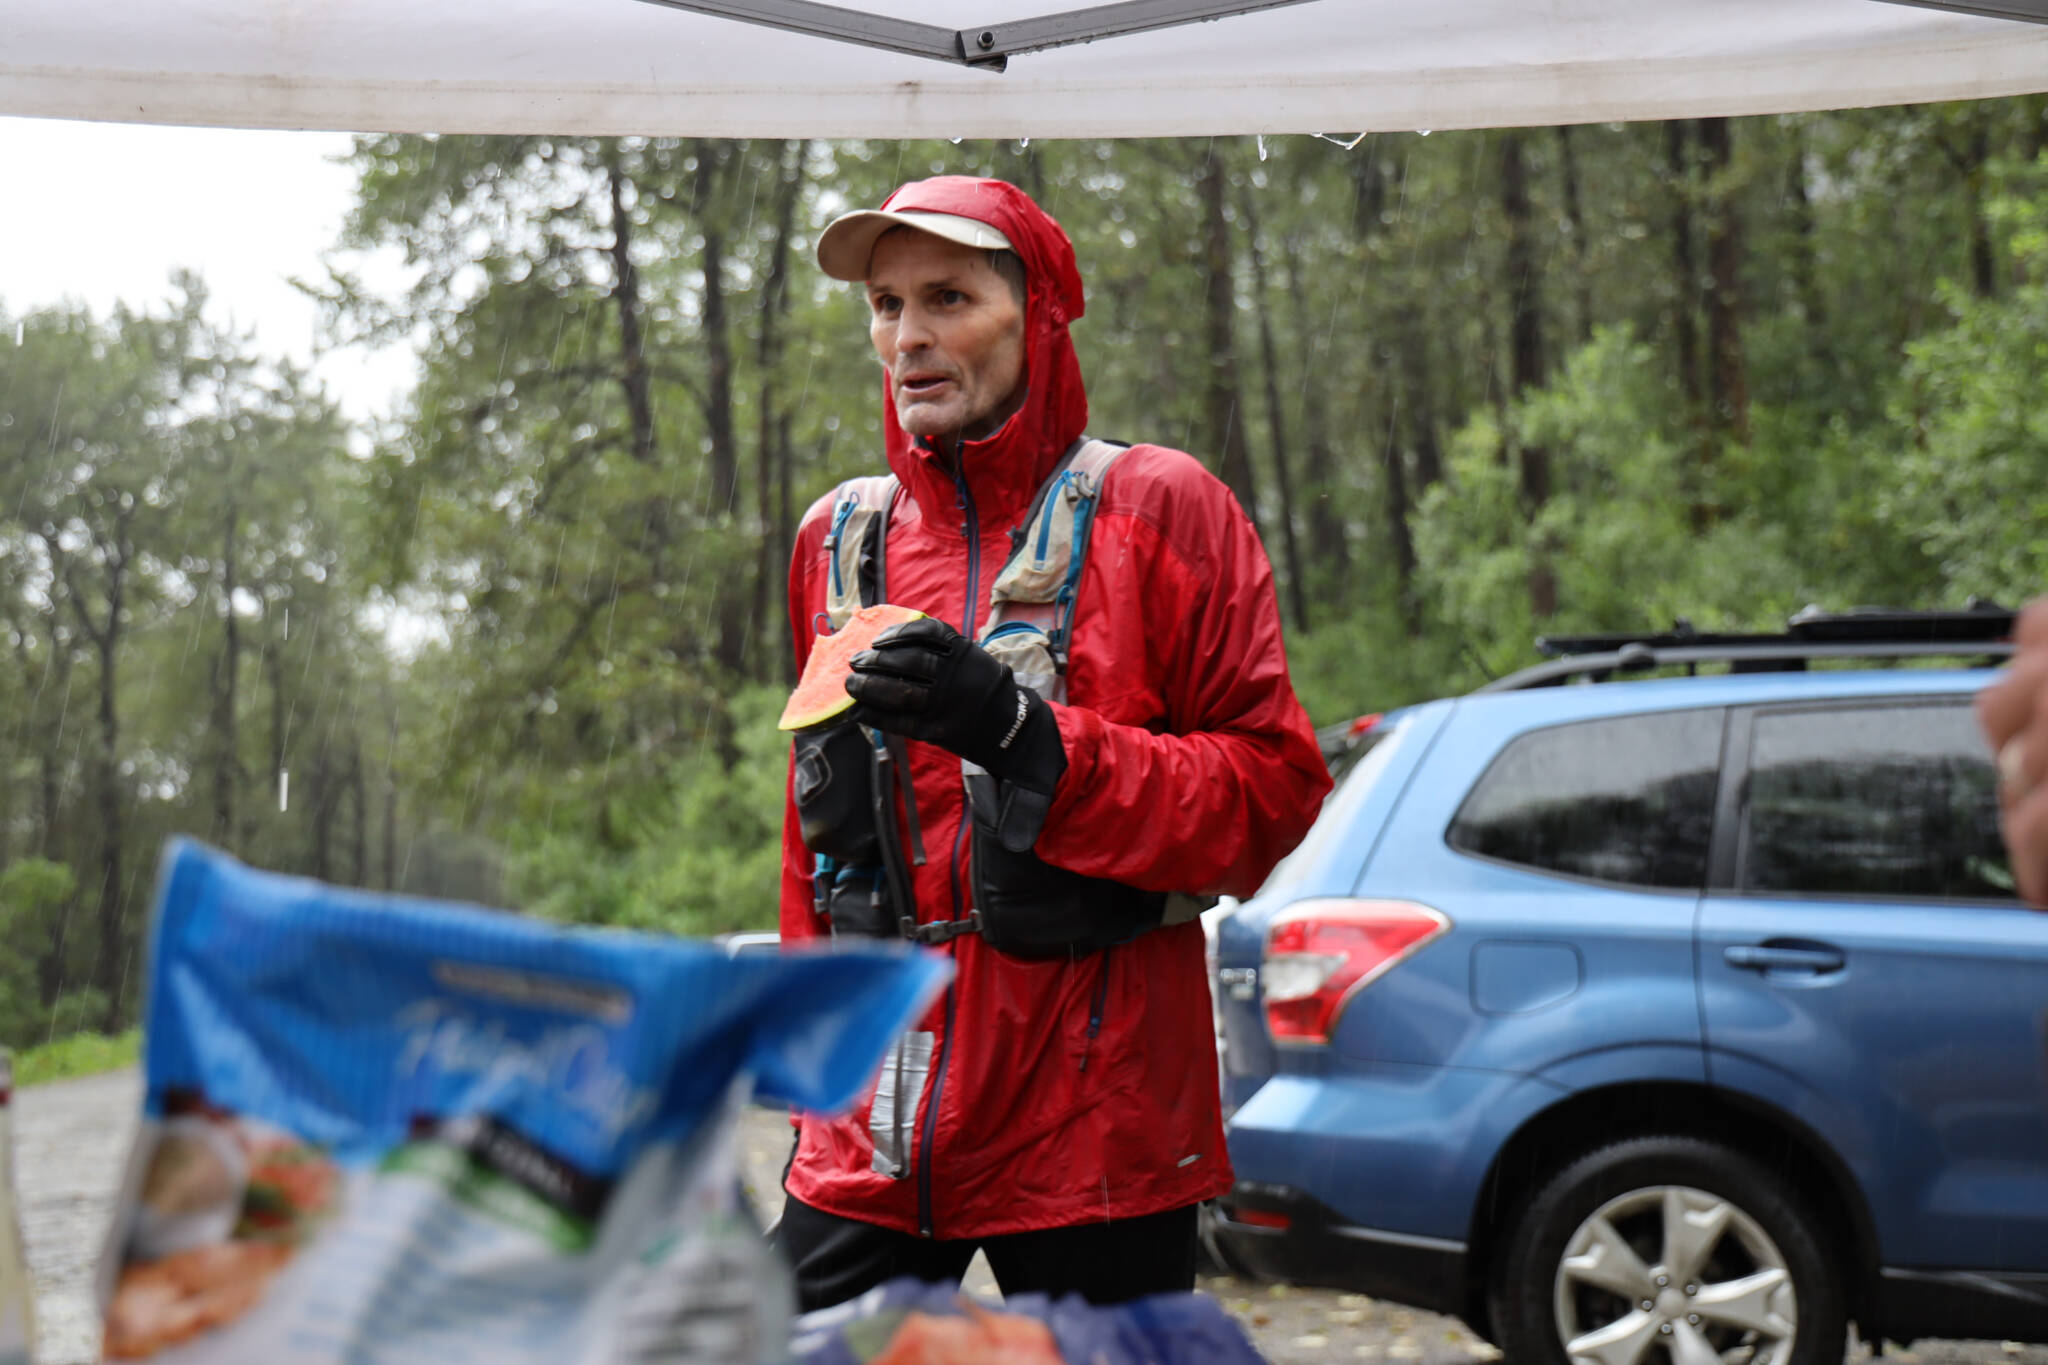 Klas Stolpe stops at an aid station to refuel before starting the next leg of the Nifty Fifty 50K race Saturday afternoon. Stolpe was the second male finisher of the race with a time of five hours, 49 minutes and 58 seconds.